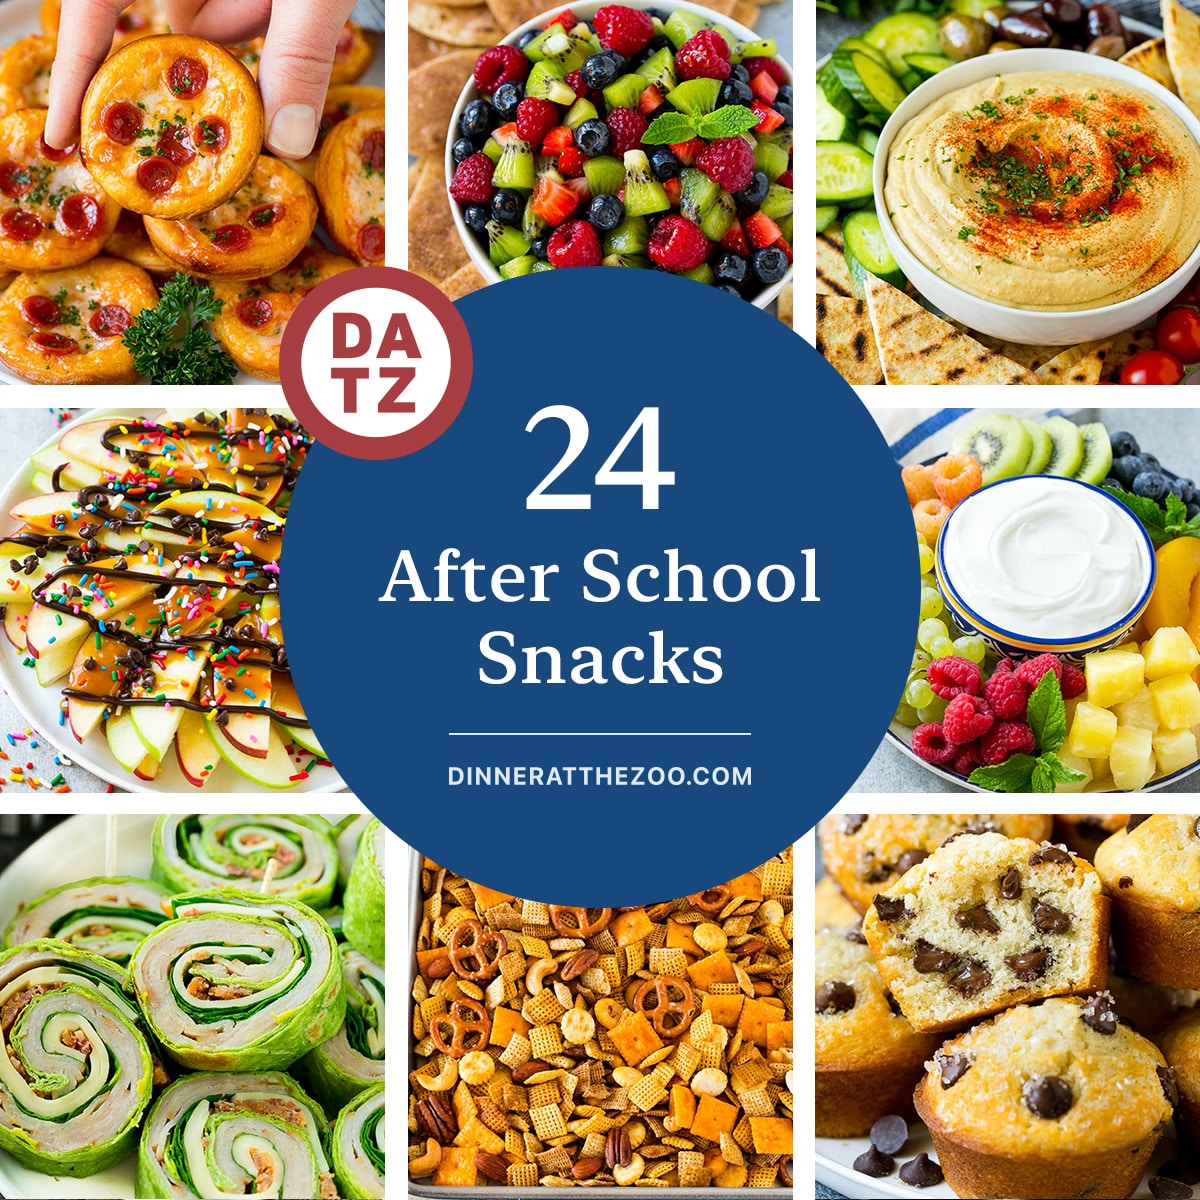 A group of delicious after school snacks like chocolate chip muffins and homemade hummus.